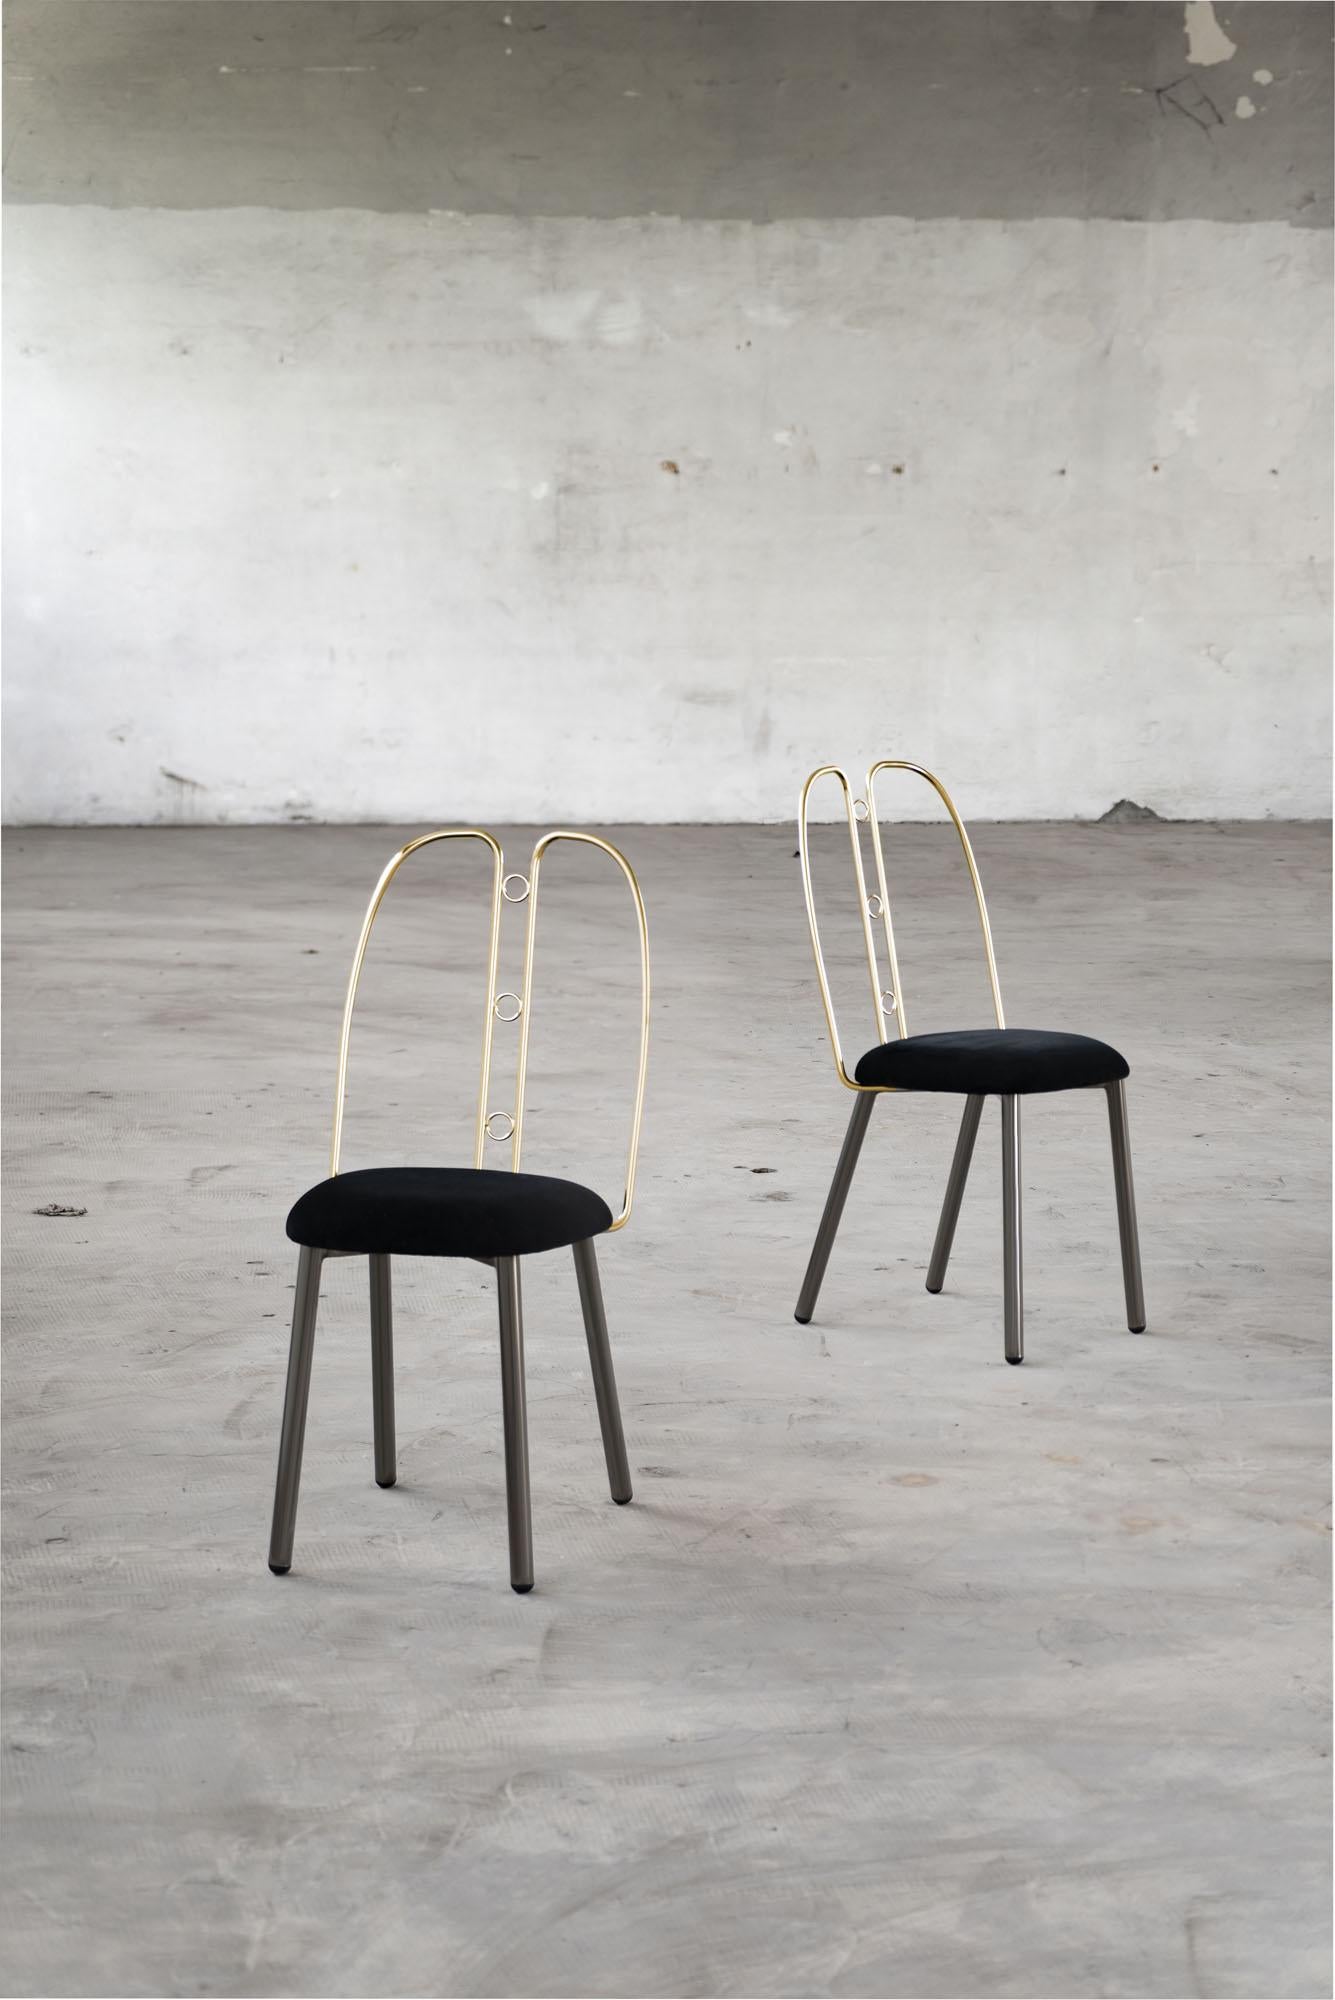 Nollie is the new romantica chair designed by Enrico Girotti and produced in Italy by Edizioni Enrico Girotti,  Inspired by Josef Hoffmann.
The soft shape of the 48 cm (19 inch) high seat connects the design of the large section tubular metal legs